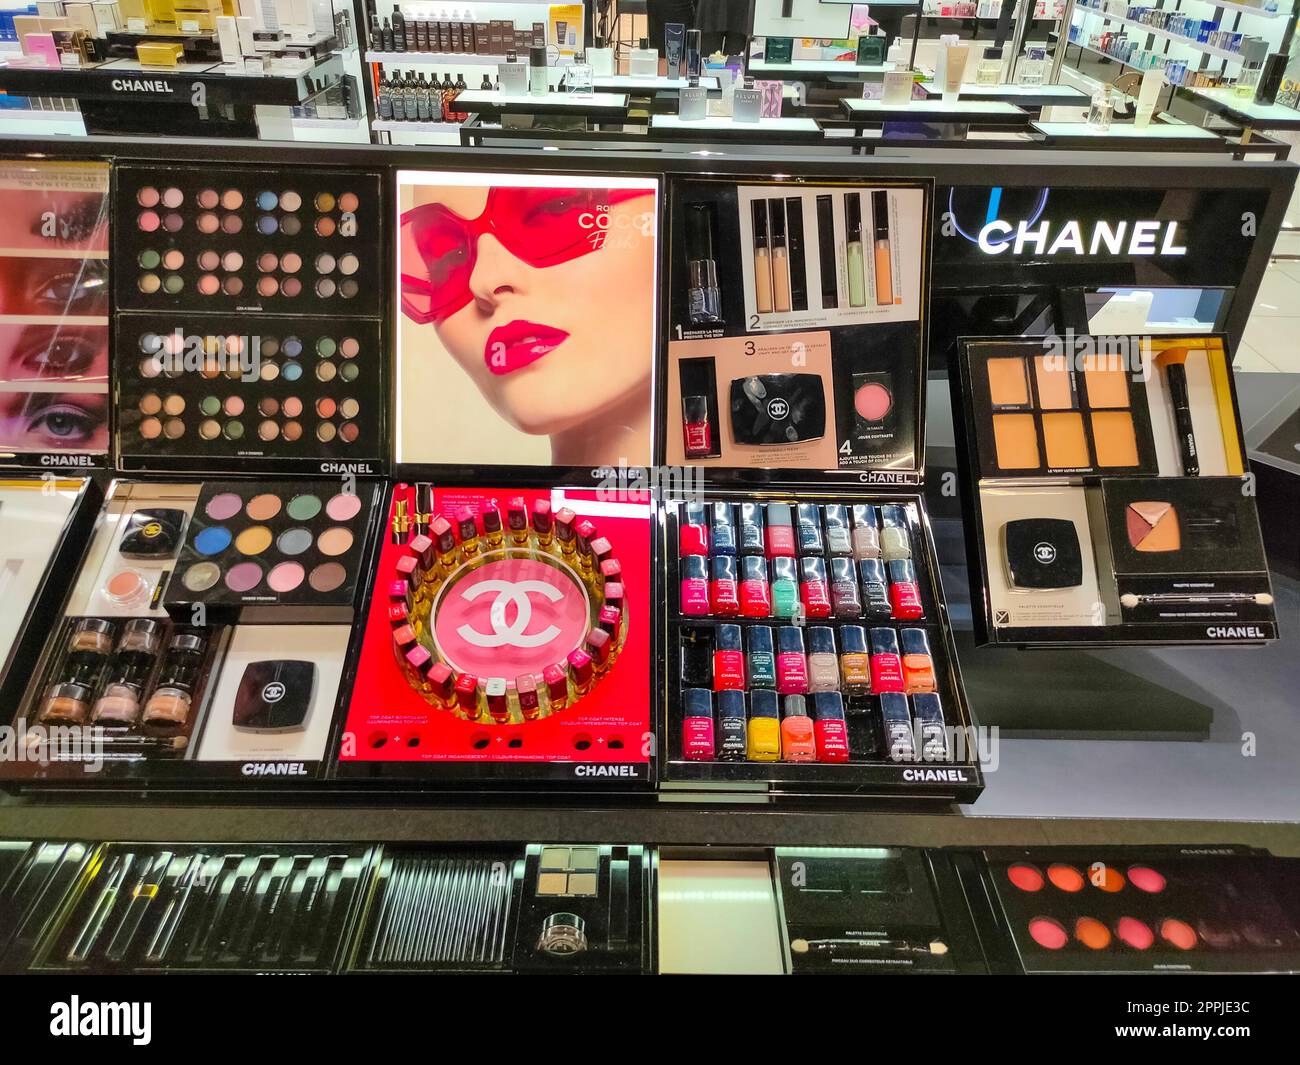 Chanel Is the Latest Luxury Brand Pulling Back From Korean Duty-Free  Segment